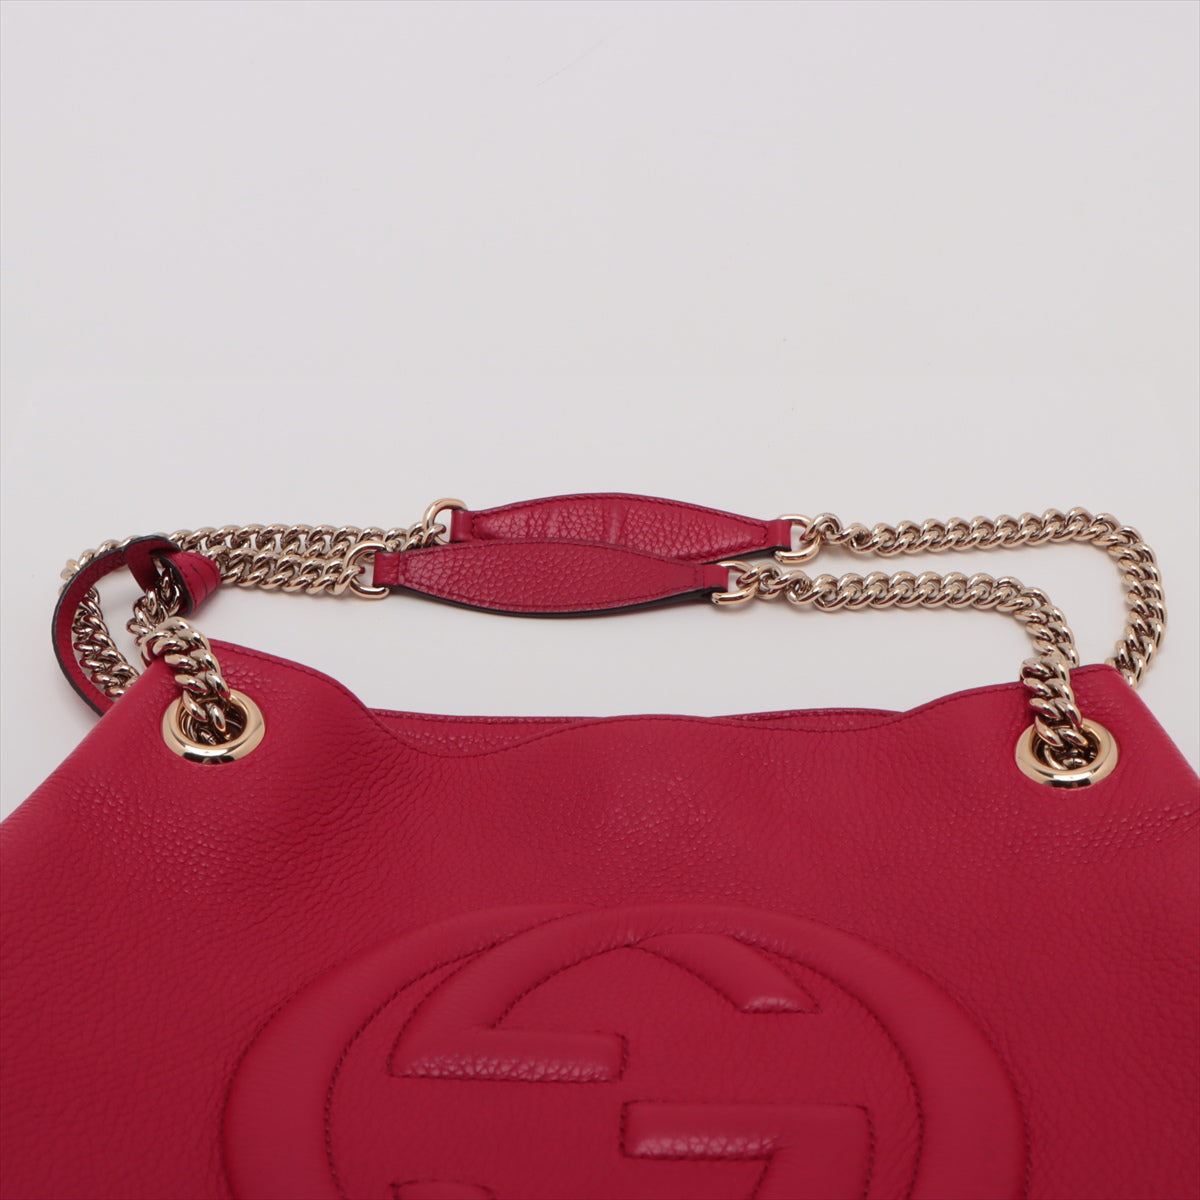 Gucci Soho Leather Chantantot Top Bag Red 536196